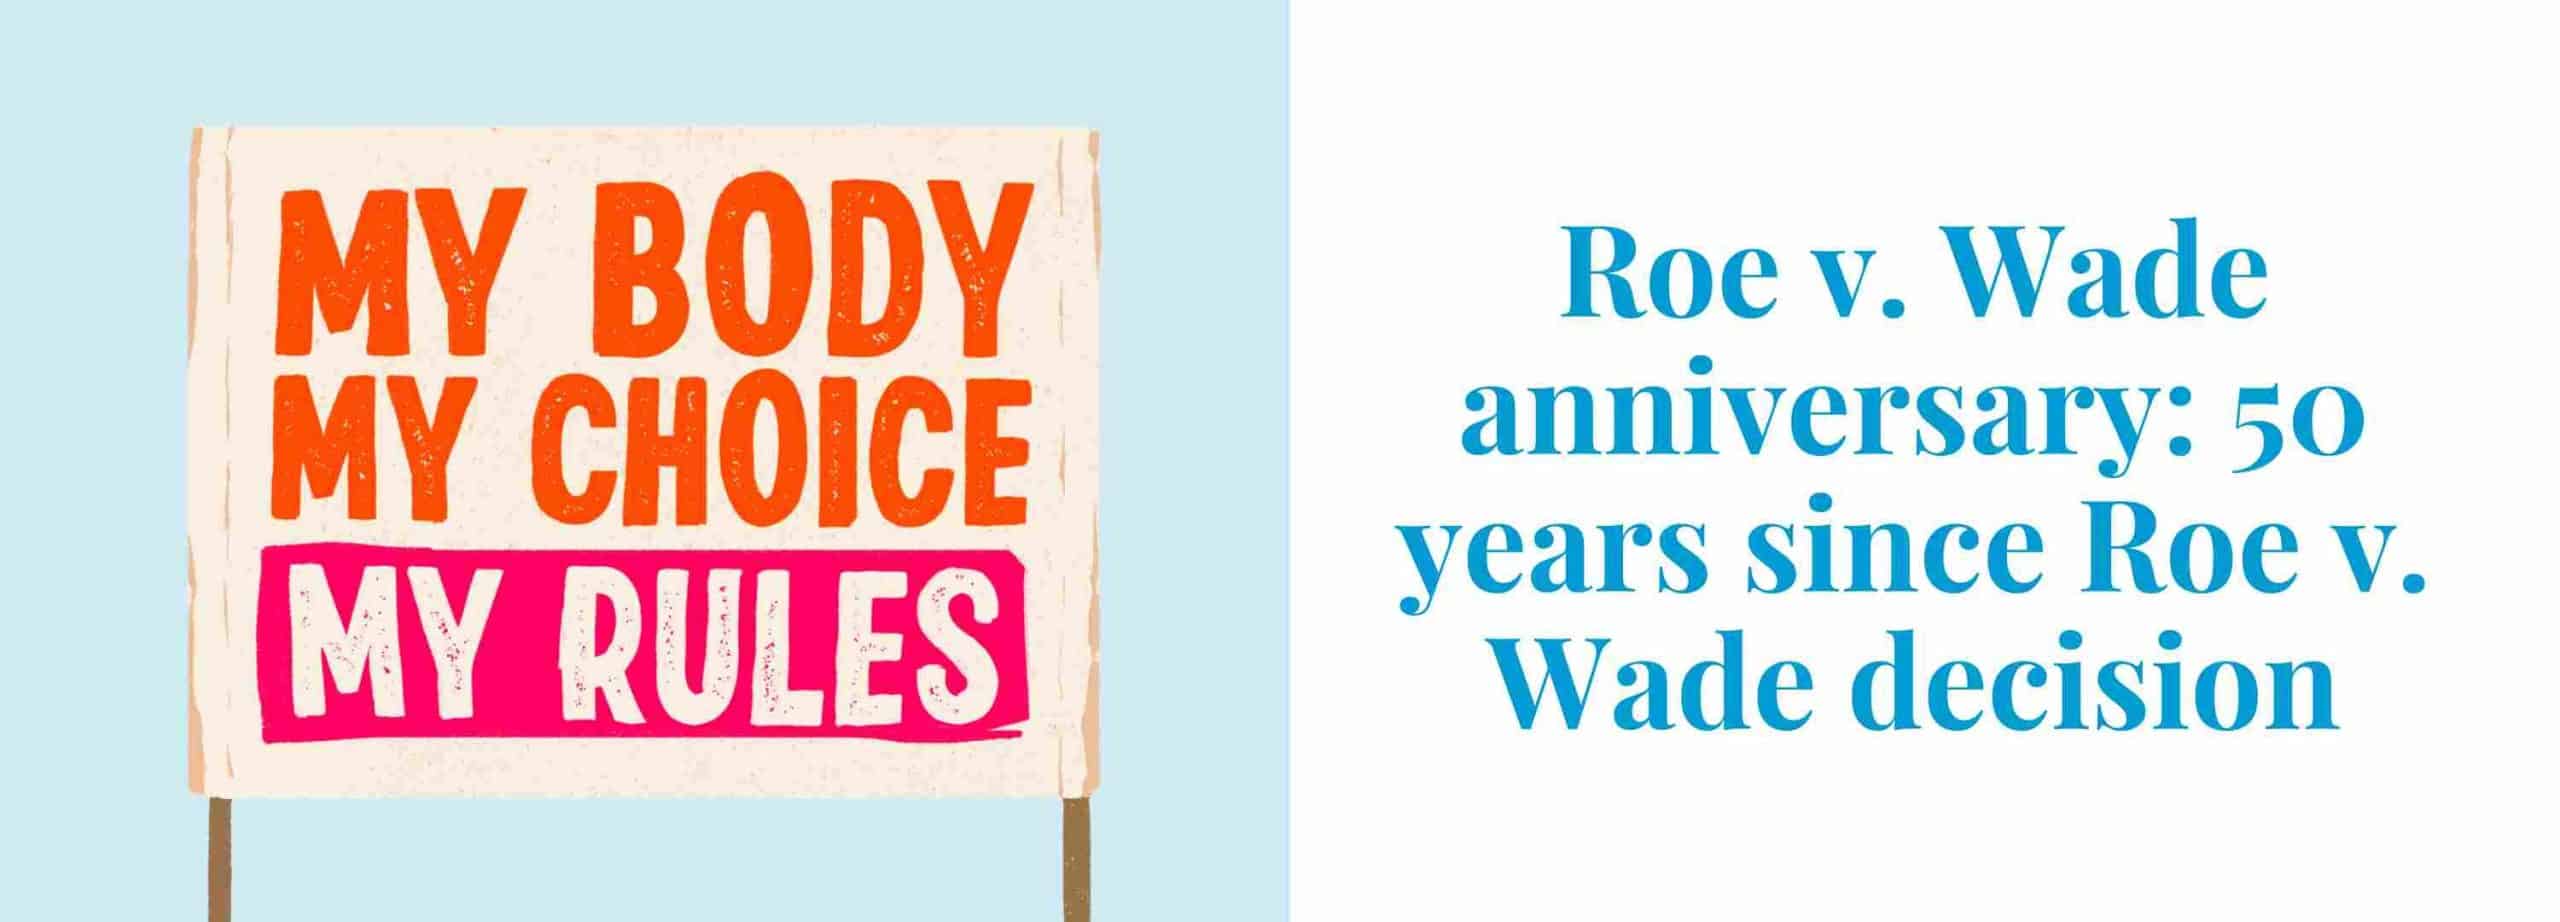 What would’ve been Roe V Wade Anniversary: 50 Years Since Roe V Wade Decision